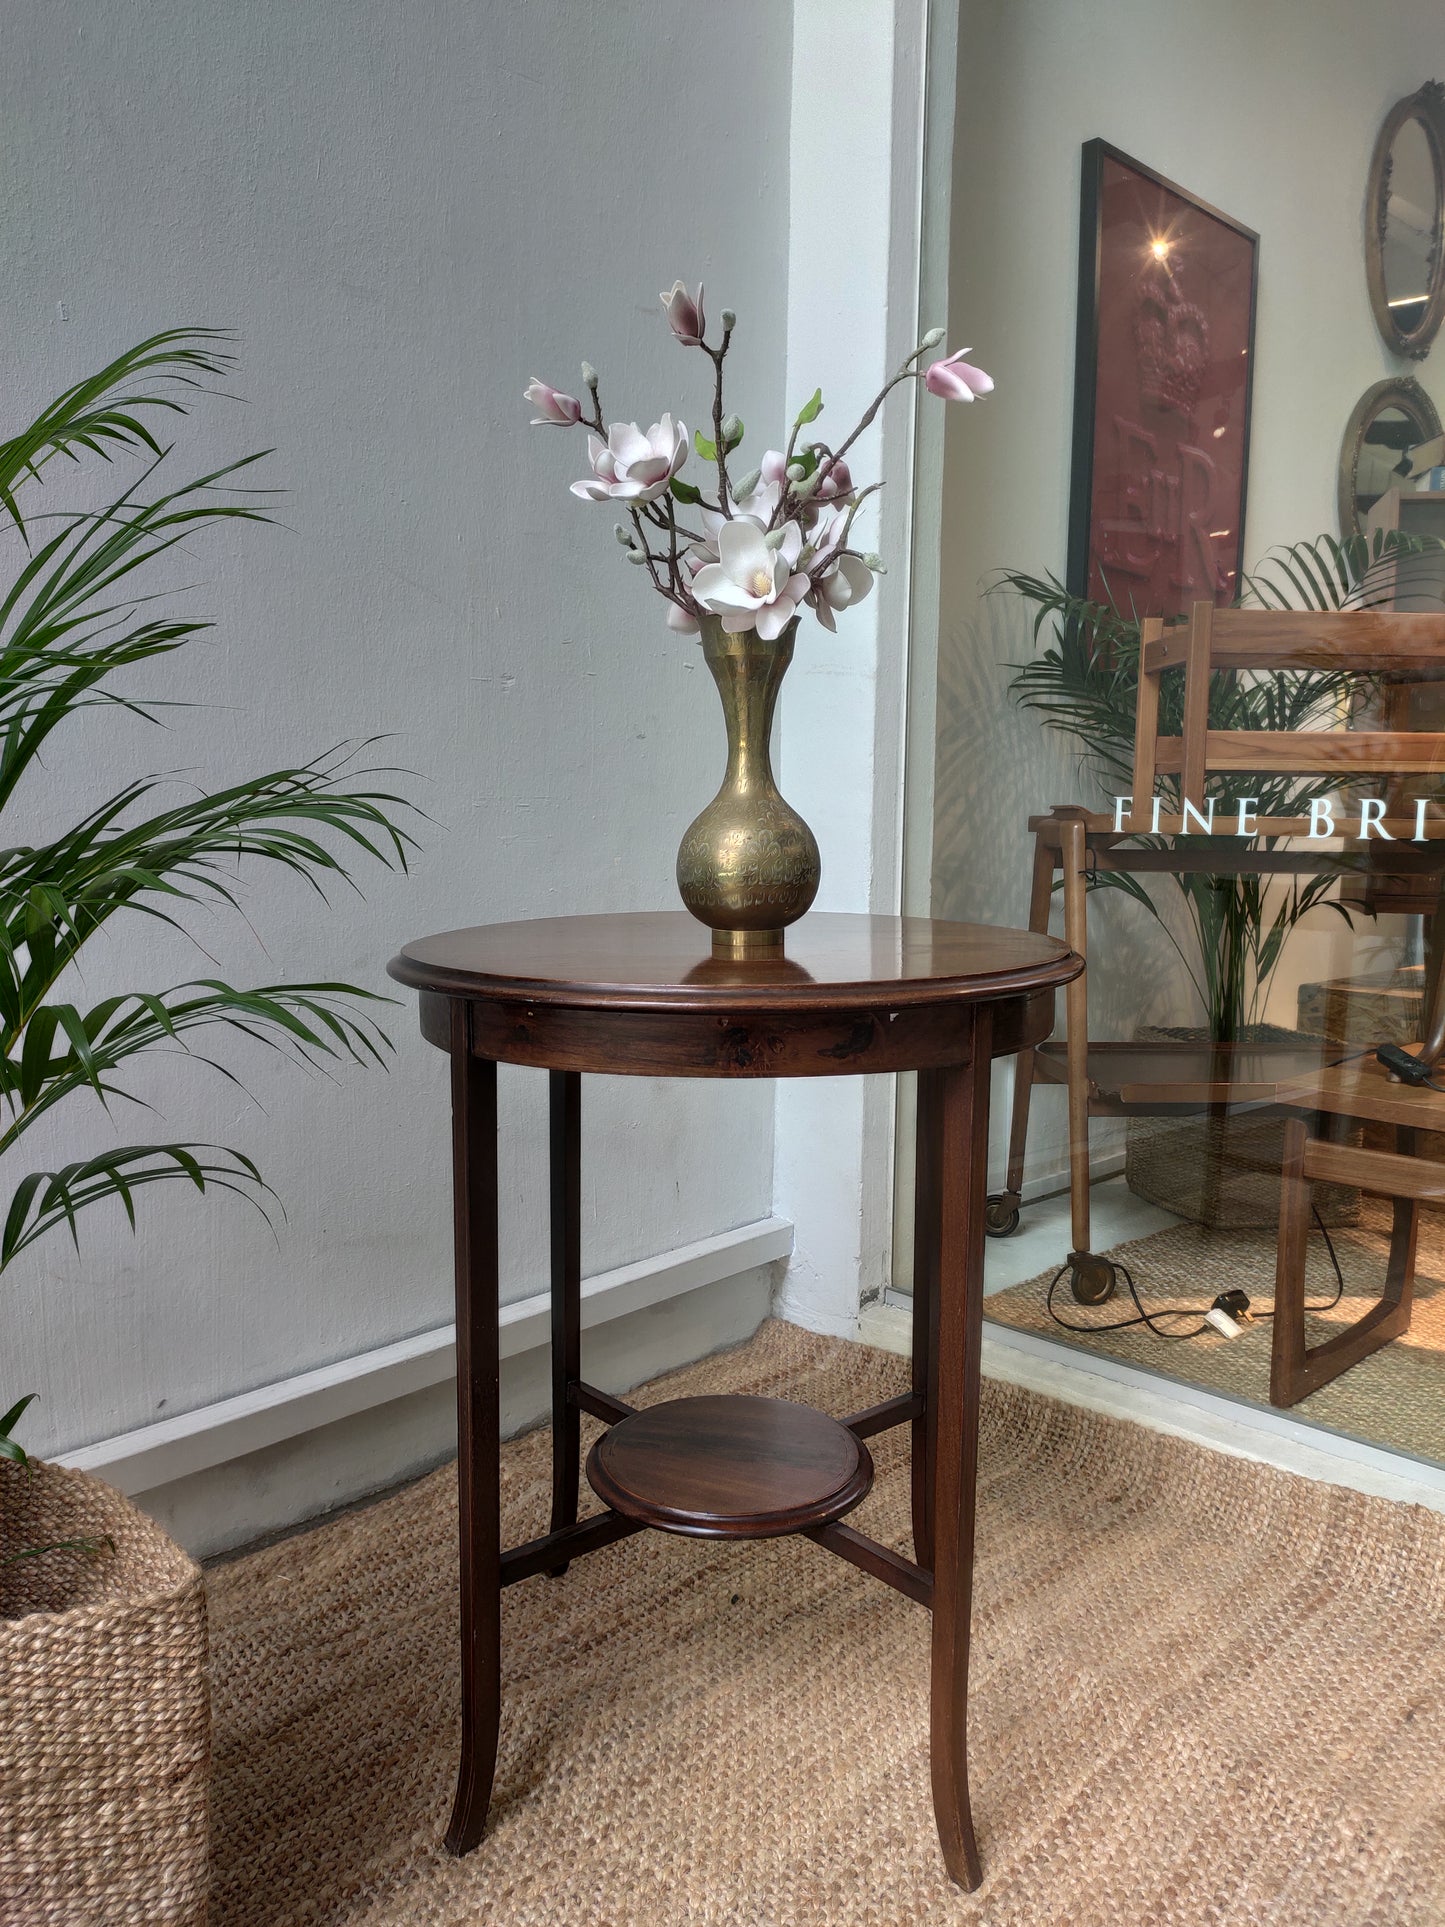 Edwardian Satinwood occasional table from 1900-1930